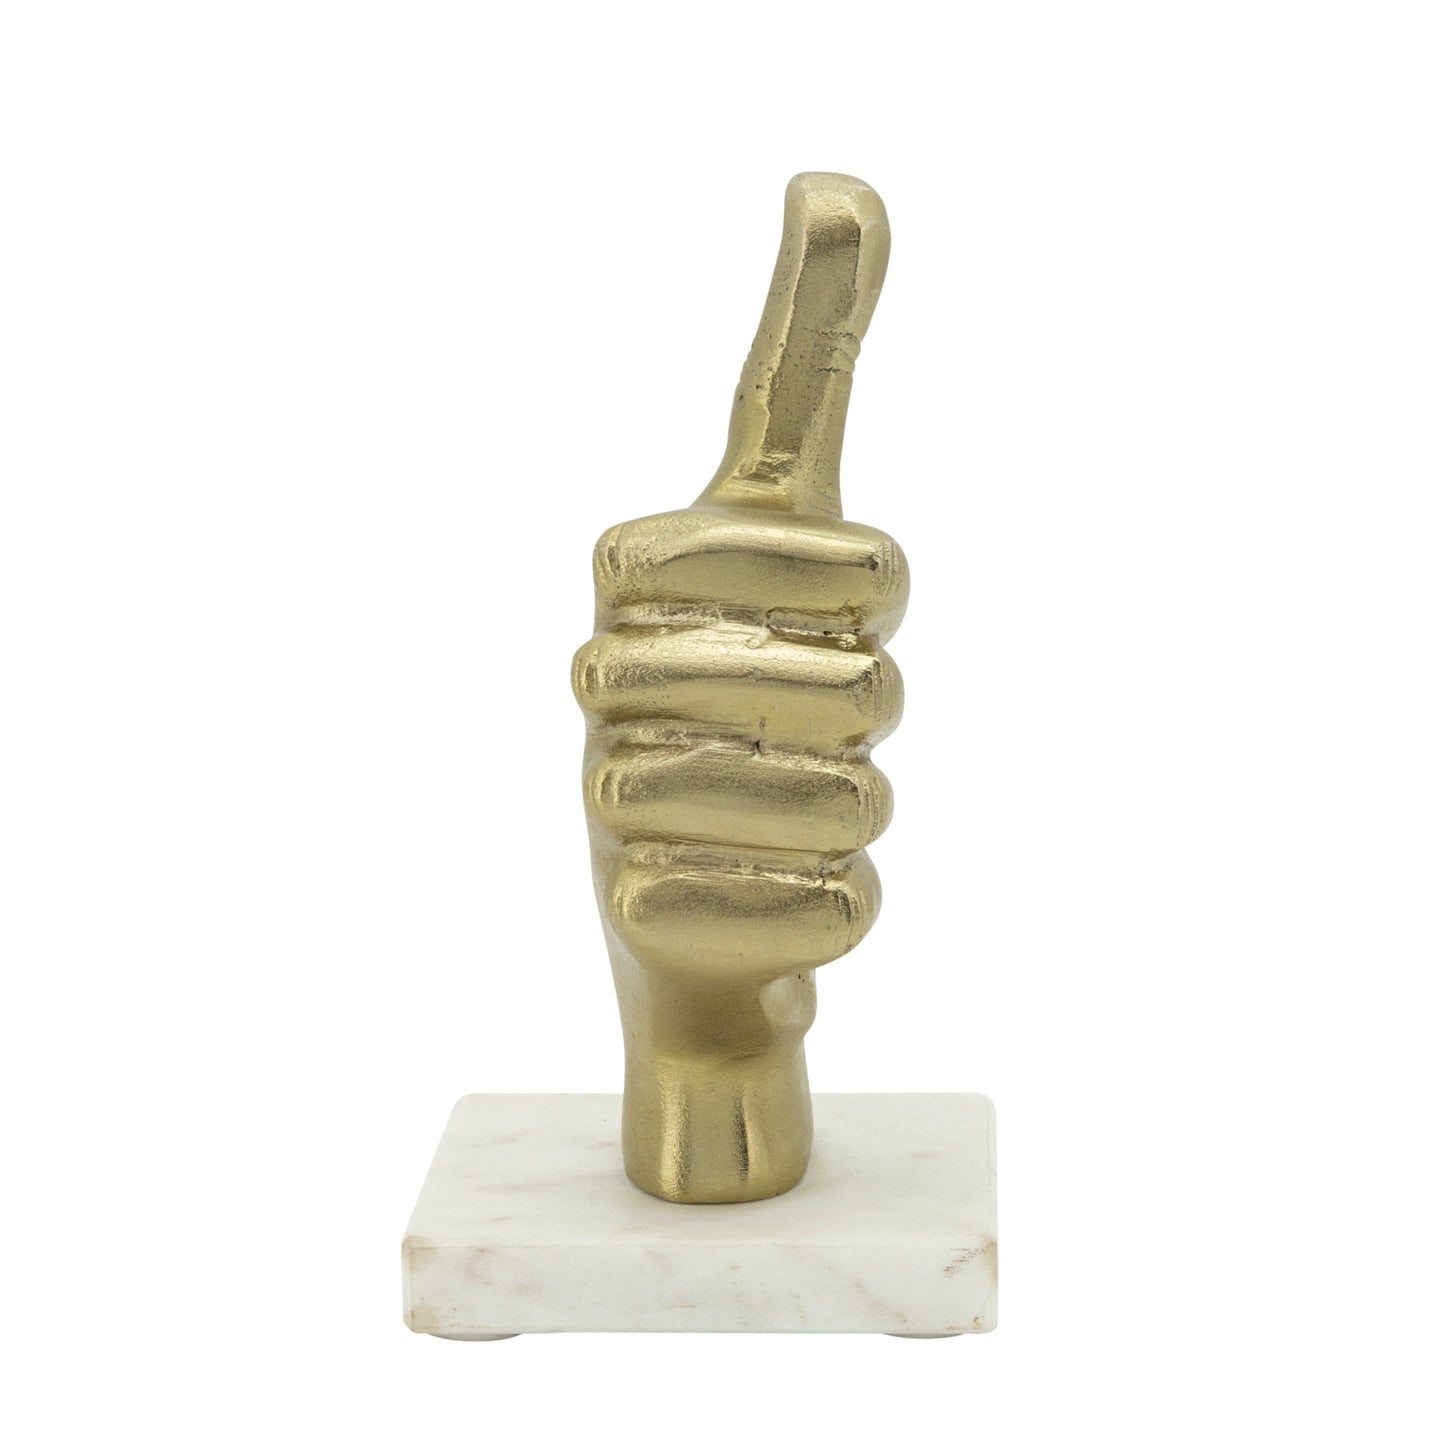 Sagebrook Home Gold Metal Thumbs Up Figurine on Marble Base, 8"H - lily & onyx